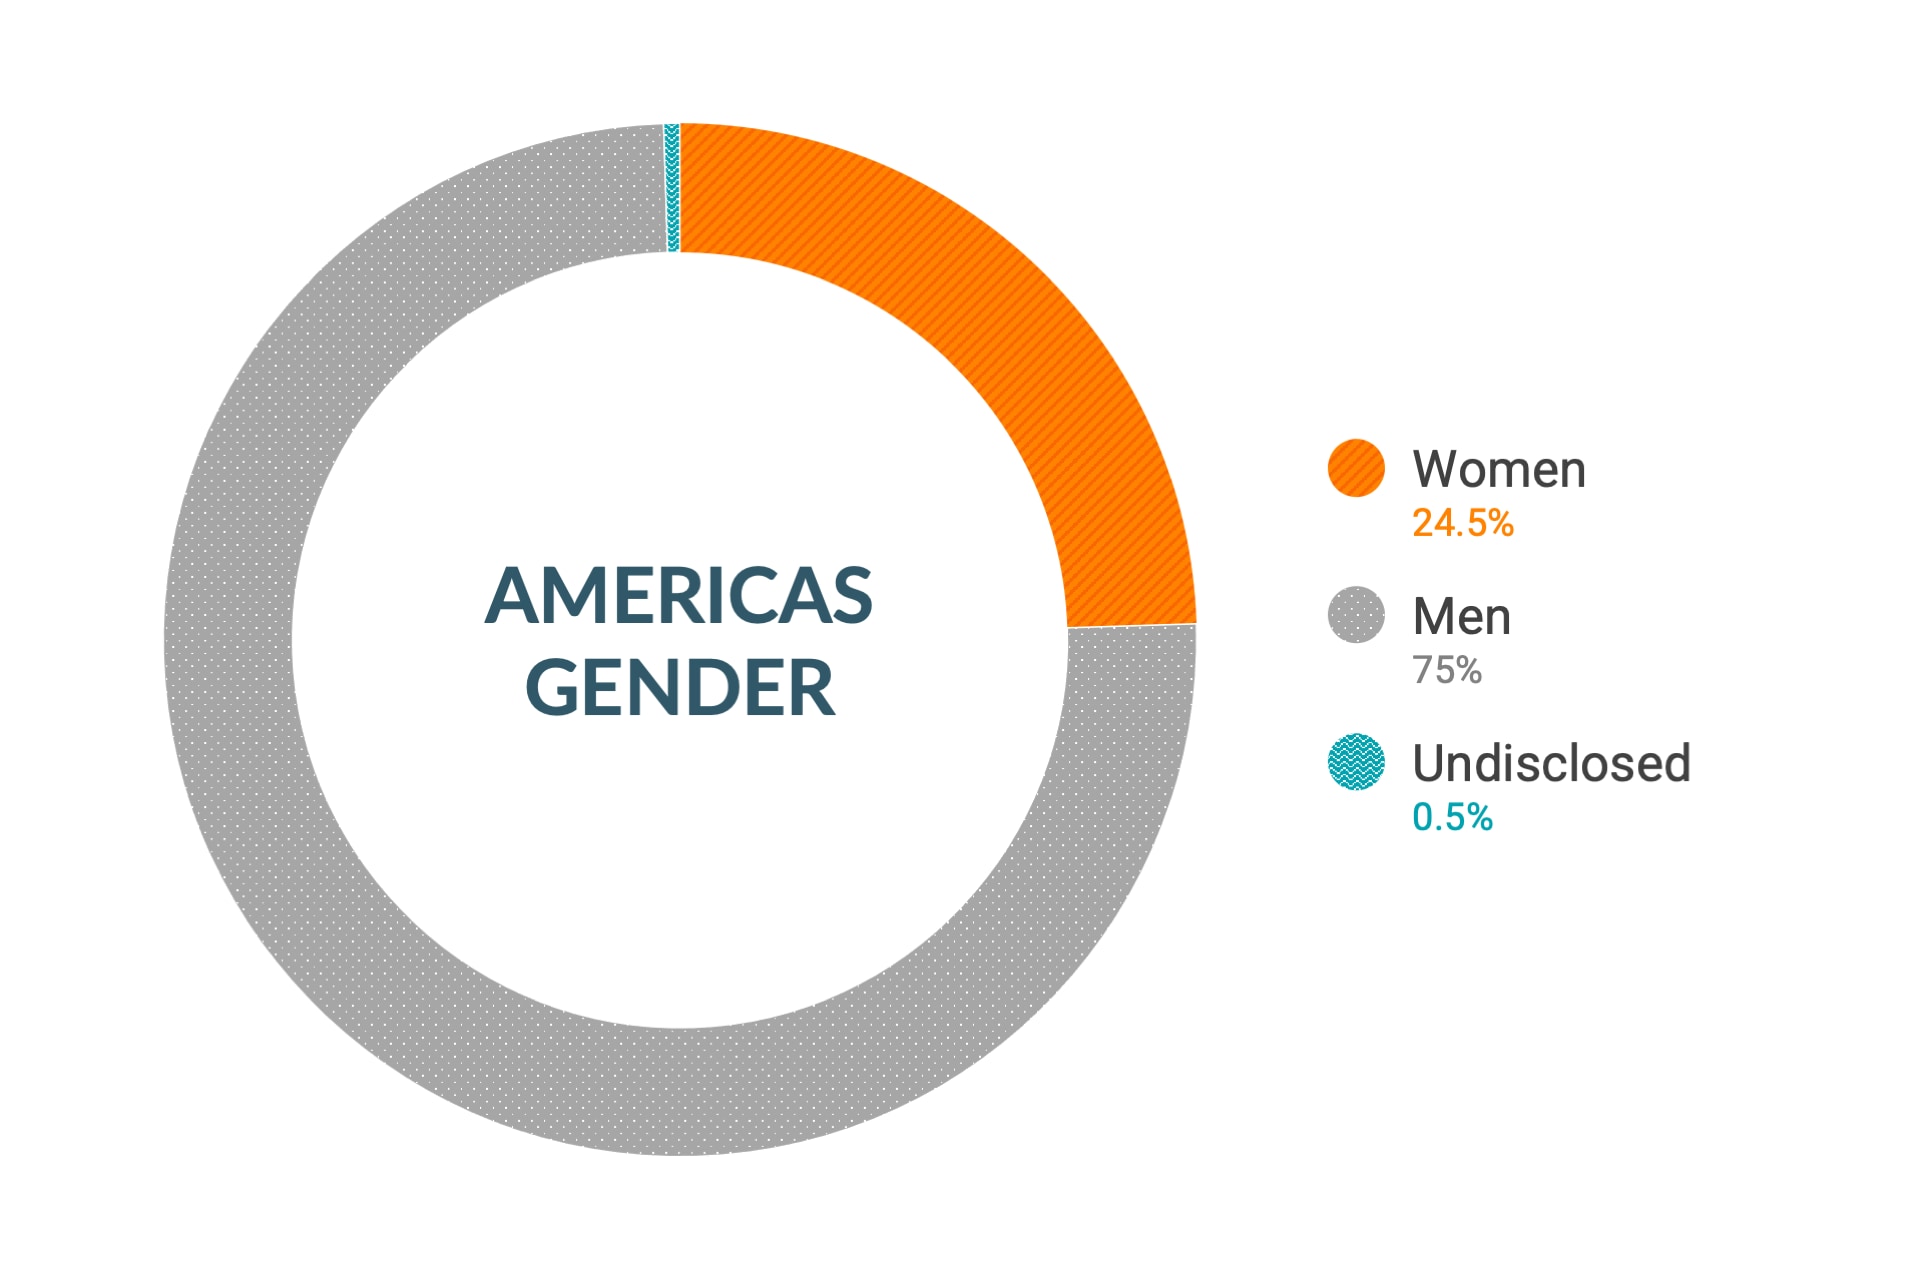 Cloudera Diversity and Inclusion data for Americas Gender: Women 24.5%, Men 75%, Undisclosed 0.5%